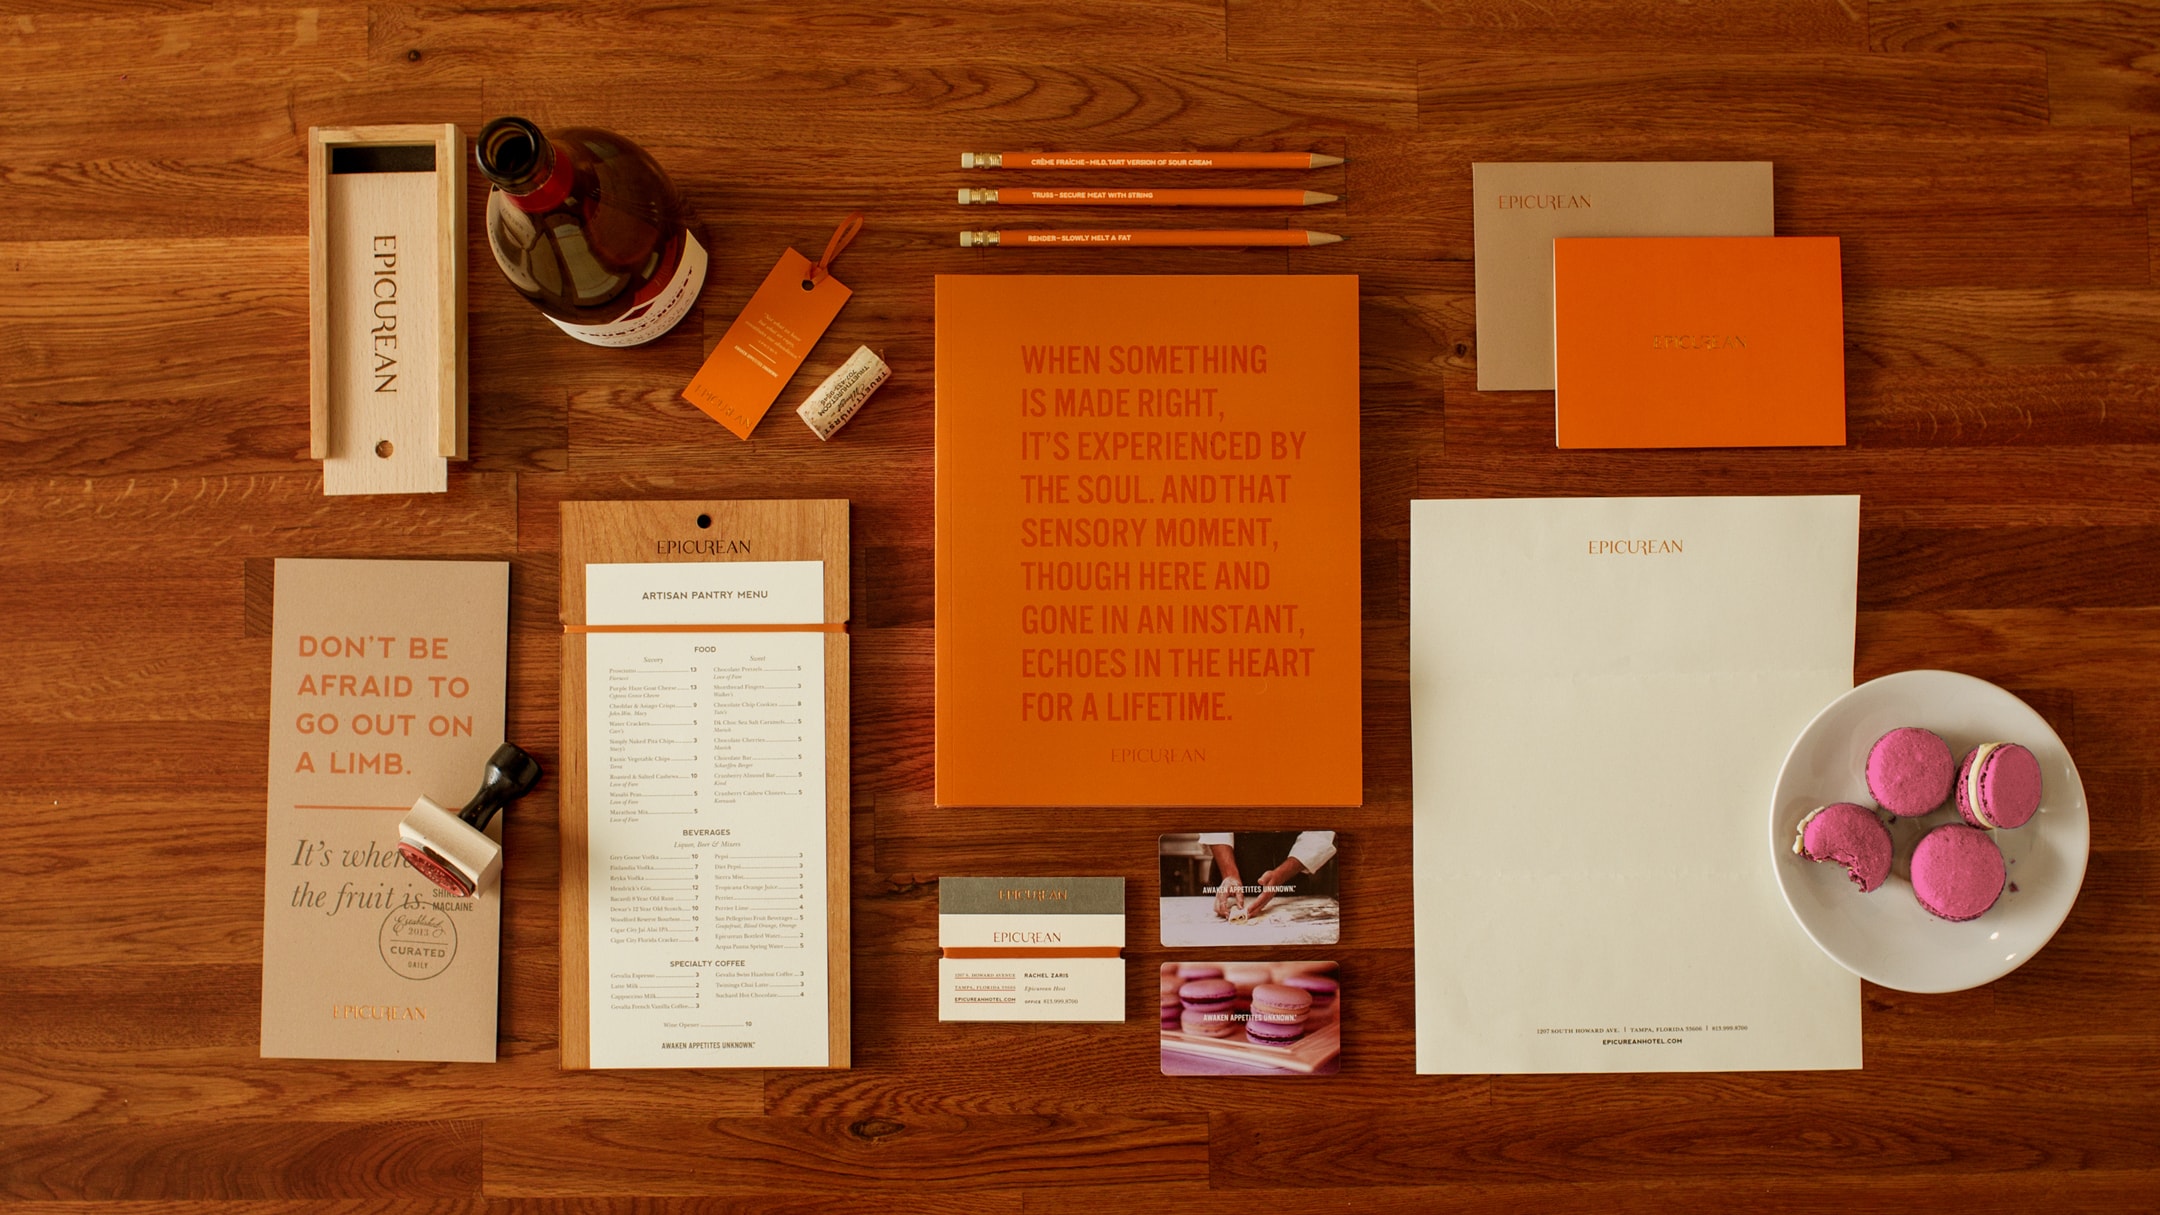 Epicurean Hotel branded collateral including menu and office supplies